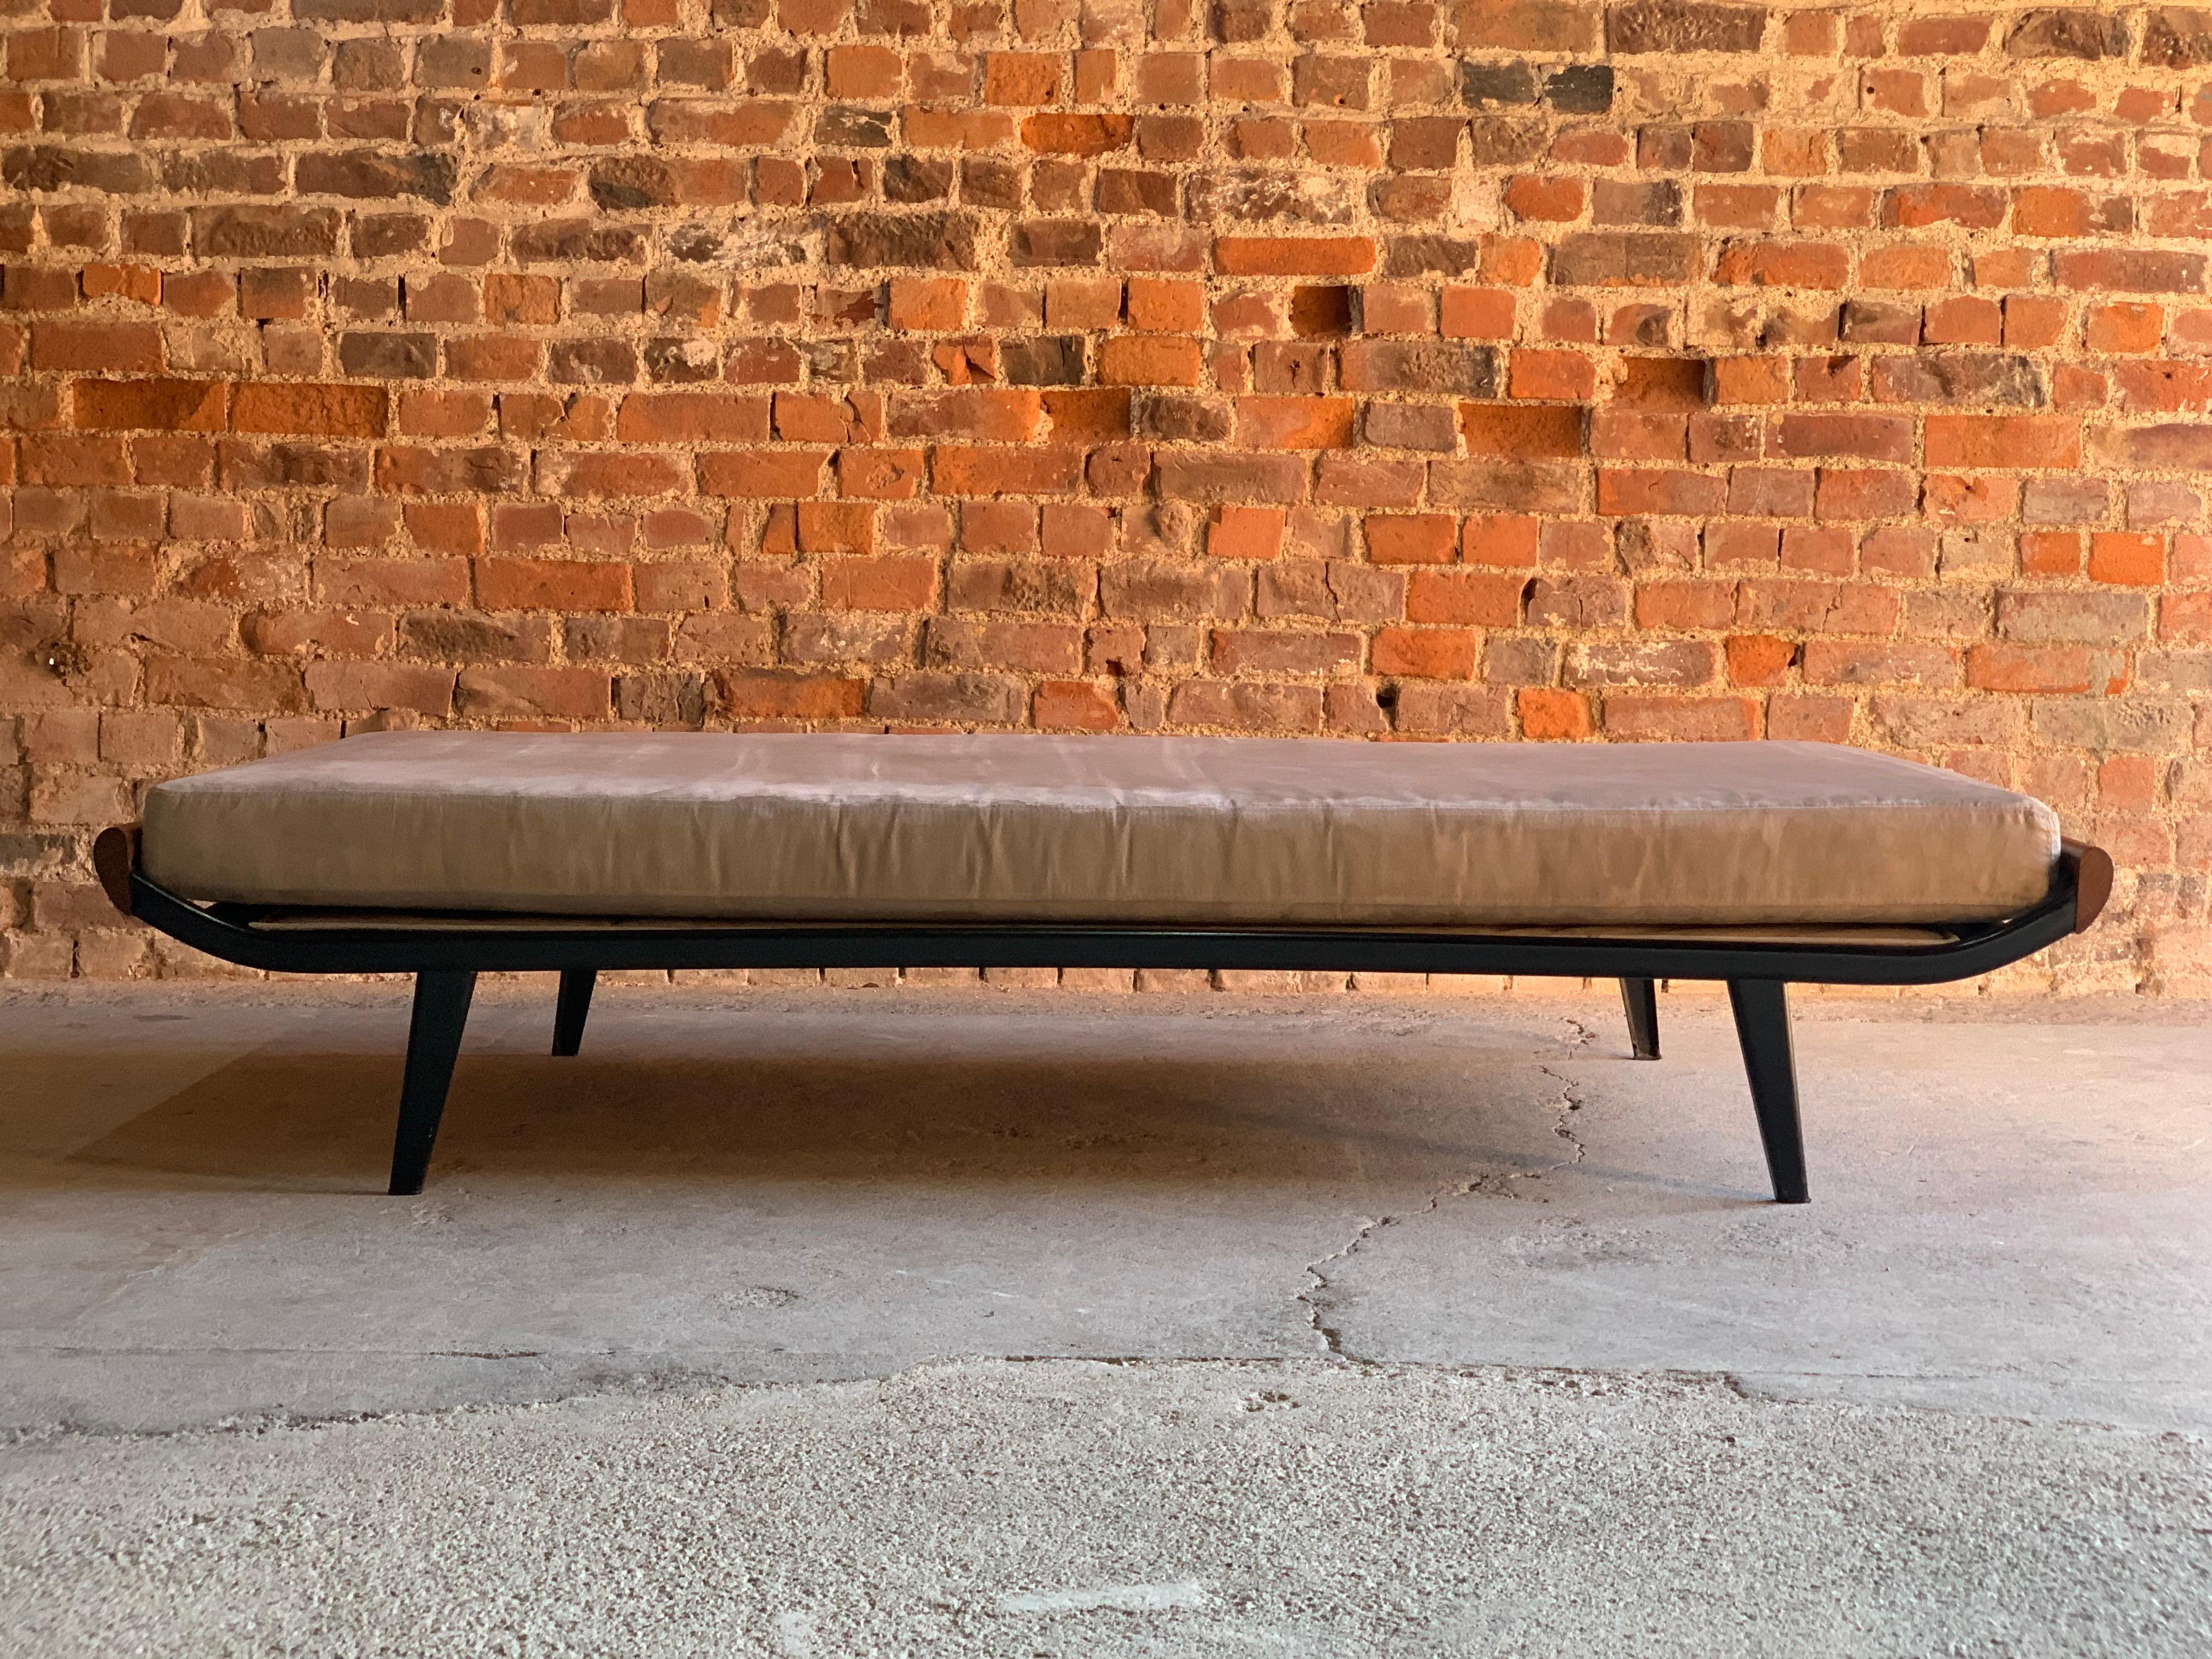 Cleopatra daybed by Dick Cordemeijer for Auping, 1950s design

Dick Cordemeijer for Auping ‘Cleopatra’ teak daybed designed in1950, the Teak ends with black metal bed frame, the cream ultra suede mattress resting over a mattress topper on sprung